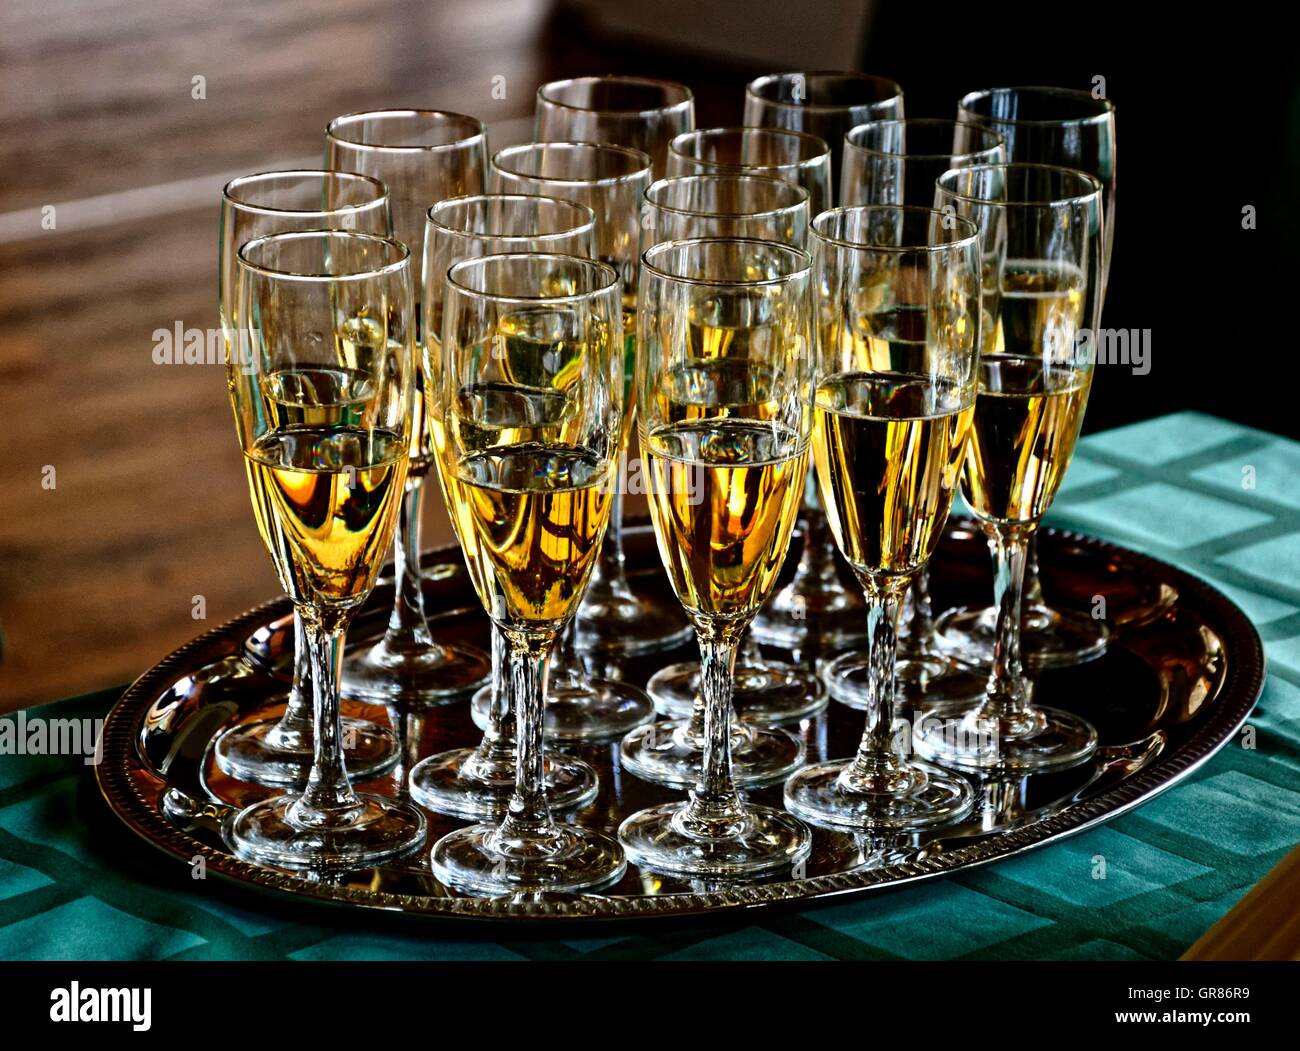 Many Champagne Glasses Filled With Champagne On Silver Tray Stock Photo